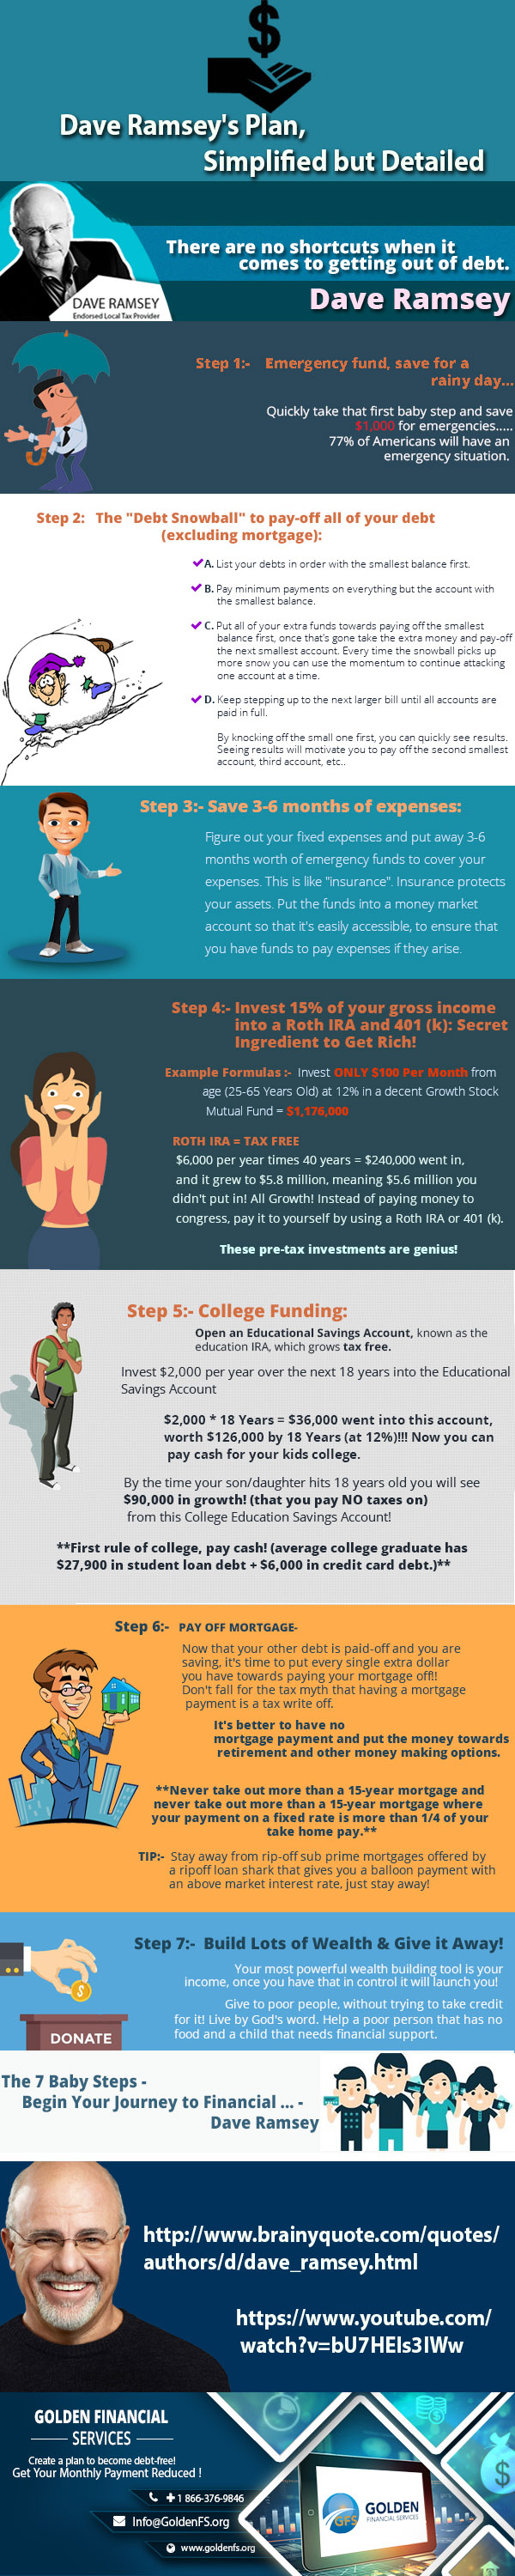 Dave Ramsey's 7 Baby Steps to Achieve Financial Freedom [Infographic]